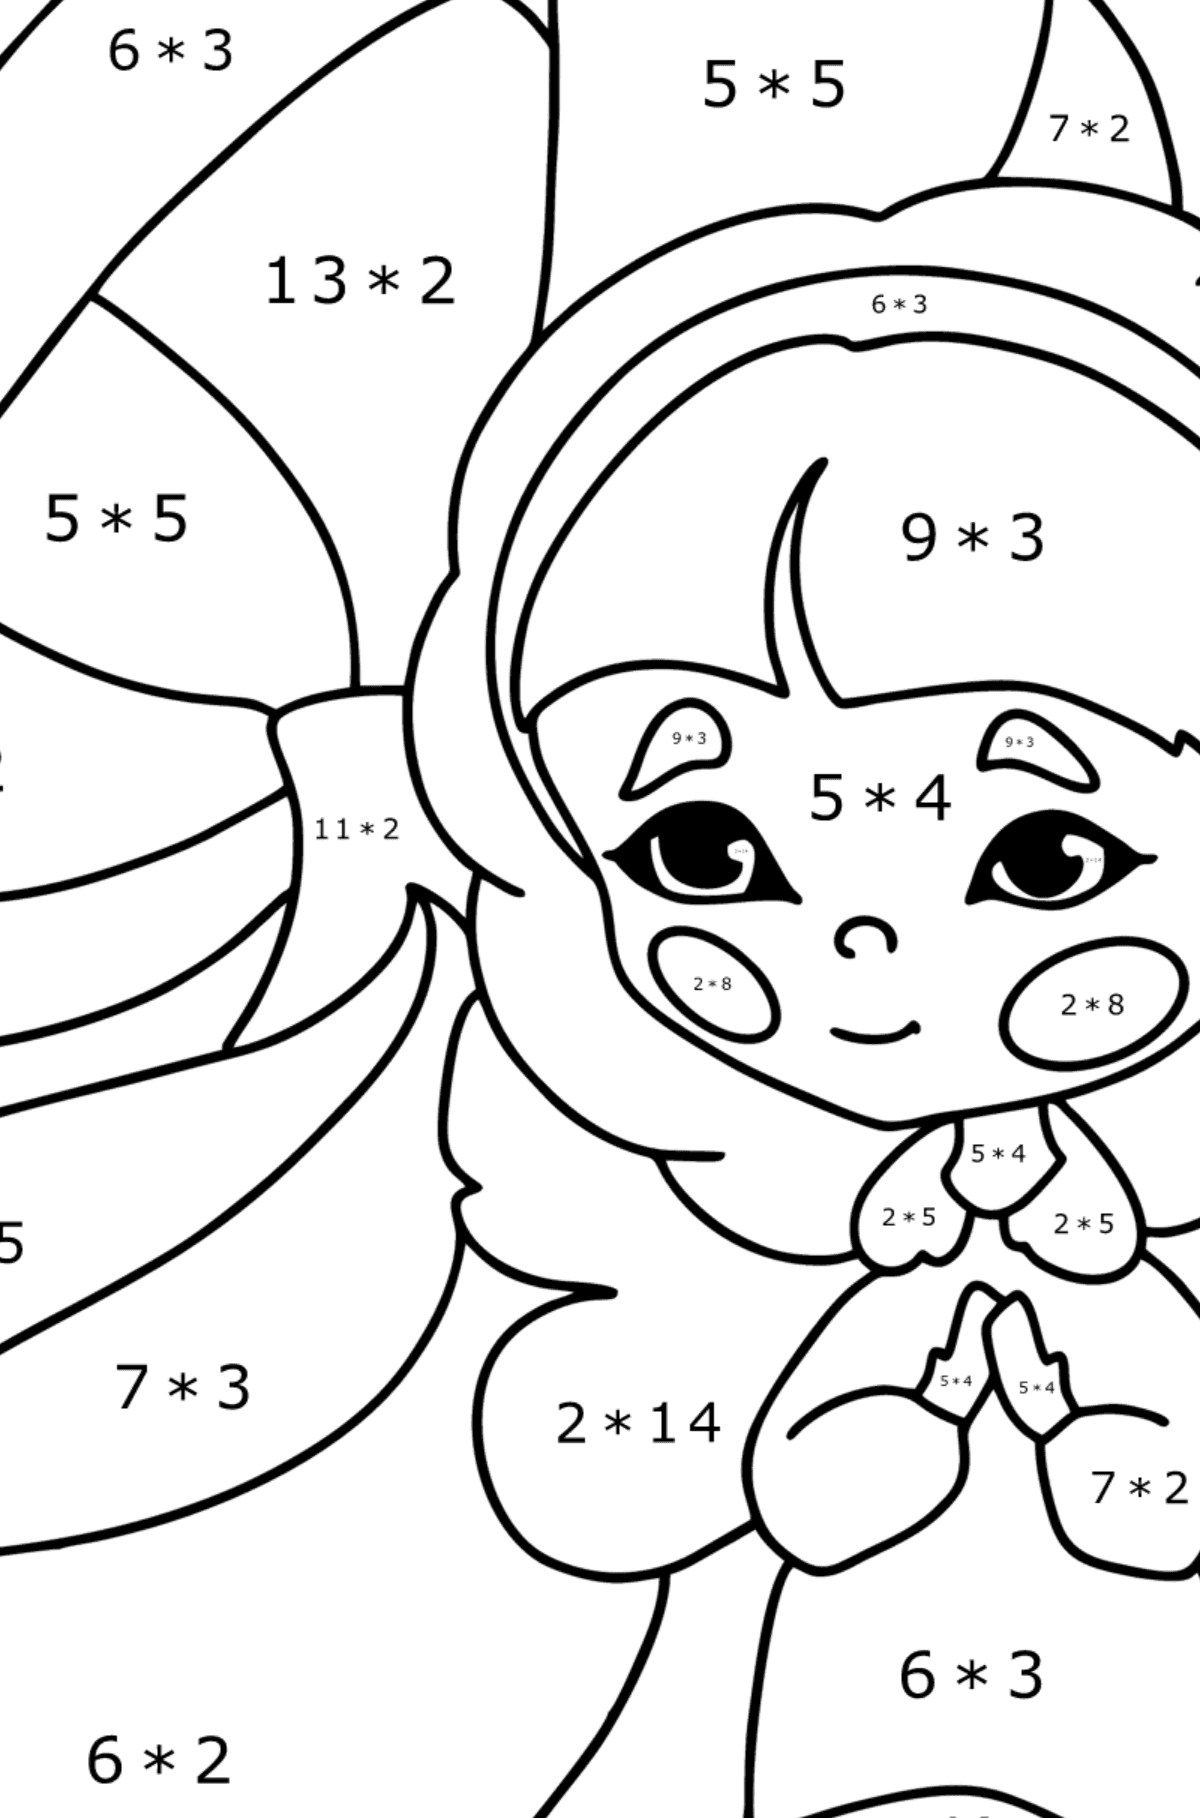 fairy and mushroom coloring page - Math Coloring - Multiplication for Kids